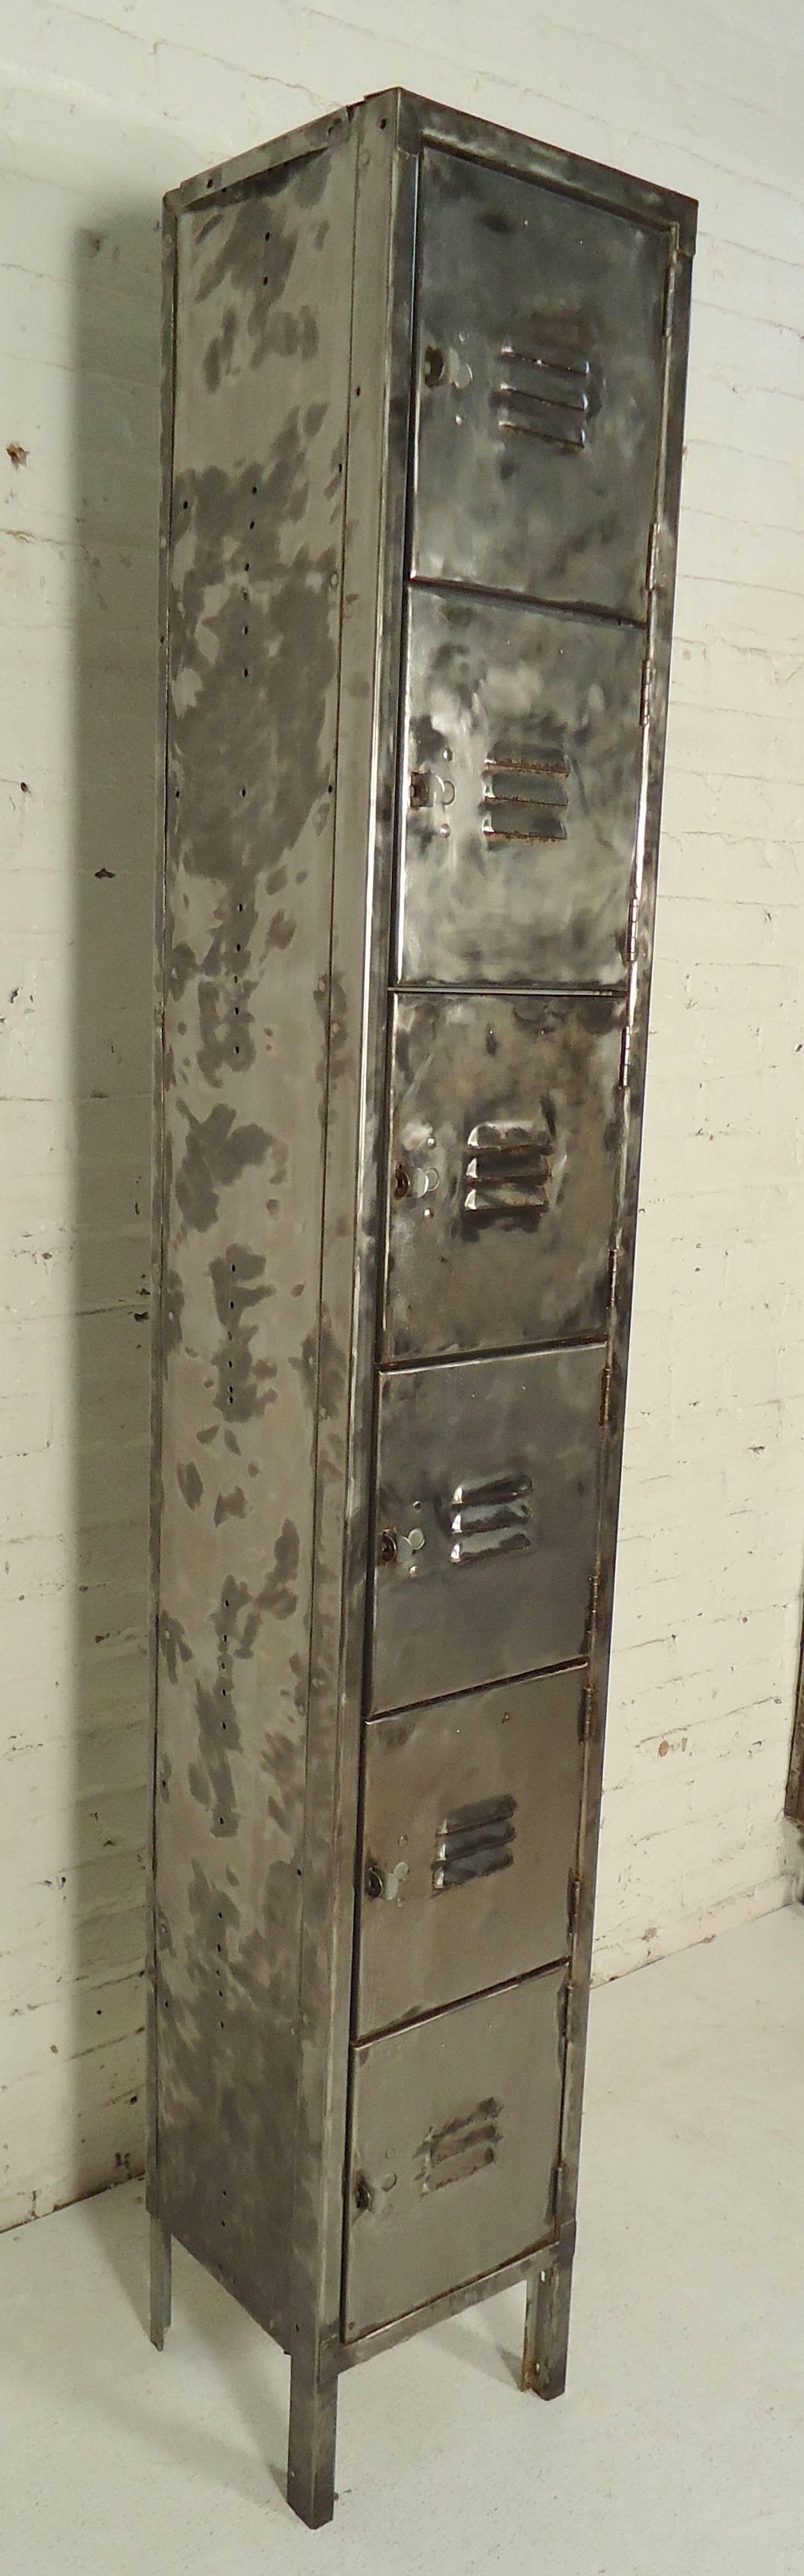 Tall locker unit with six cubbies for storage. Locker has been given a bare metal style finish.

(Please confirm item location NY or NJ with dealer).
 